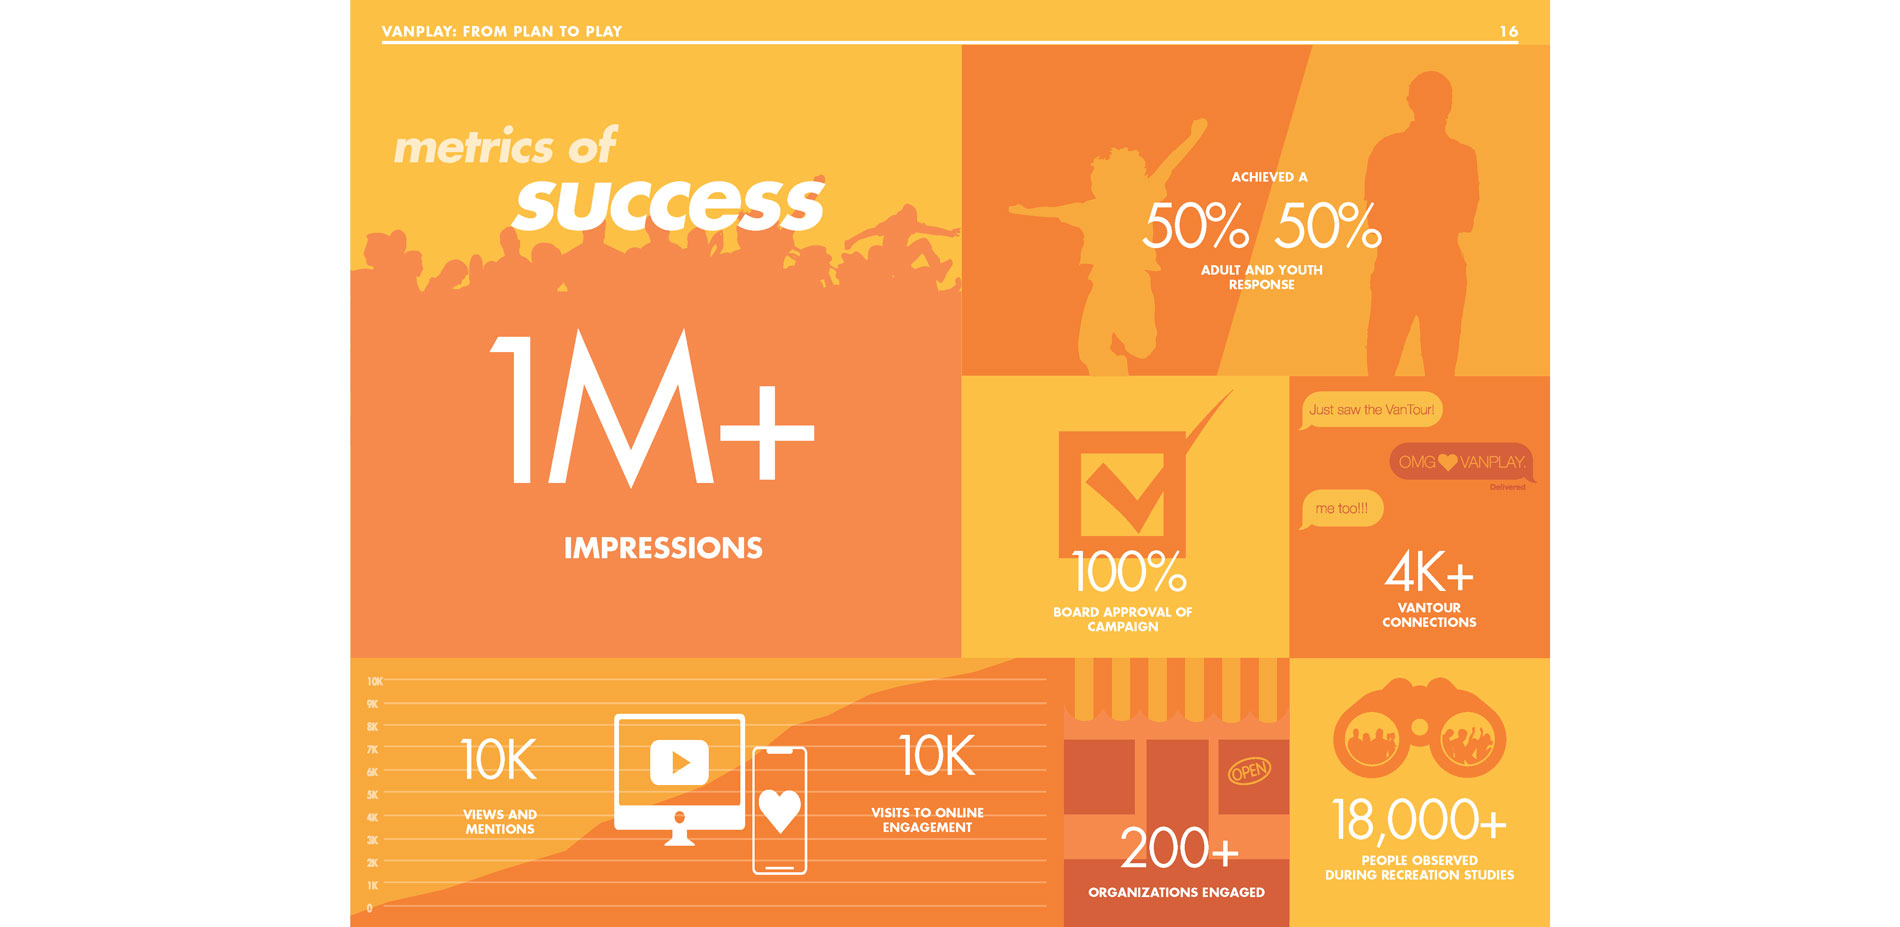 1M+ Impressions; Achieved a 50%/50% adult and youth response; 100% Board approval of campaign; 4K+ VanTour connections; 10K Views and Mentions/10K Vis…